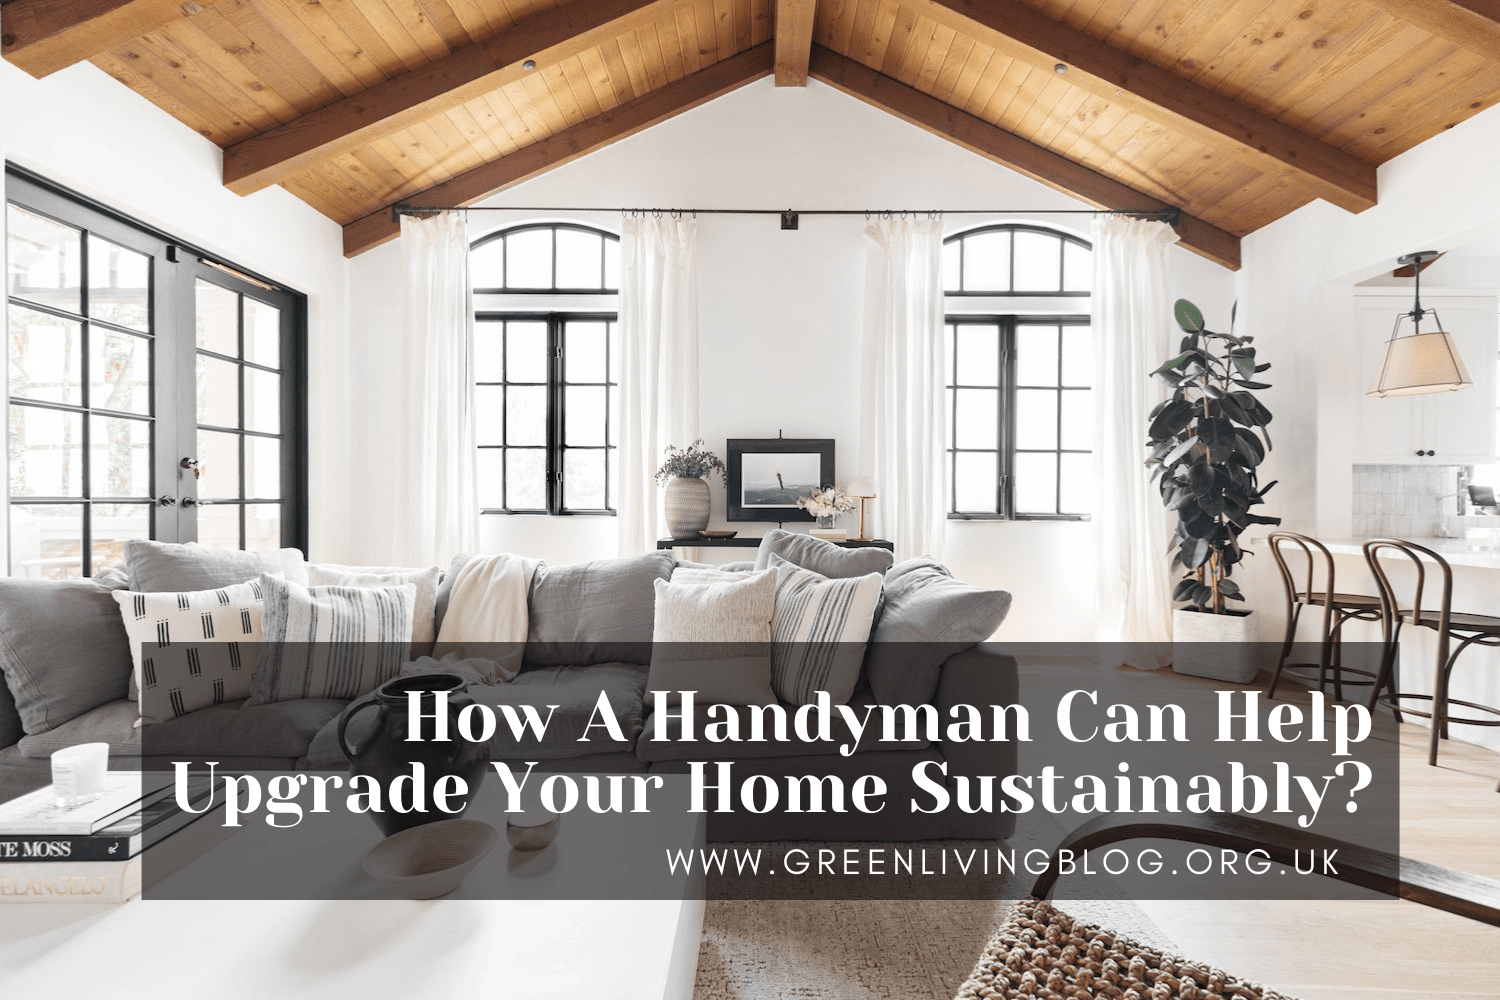 How A Handyman Can Help Upgrade Your Home Sustainably